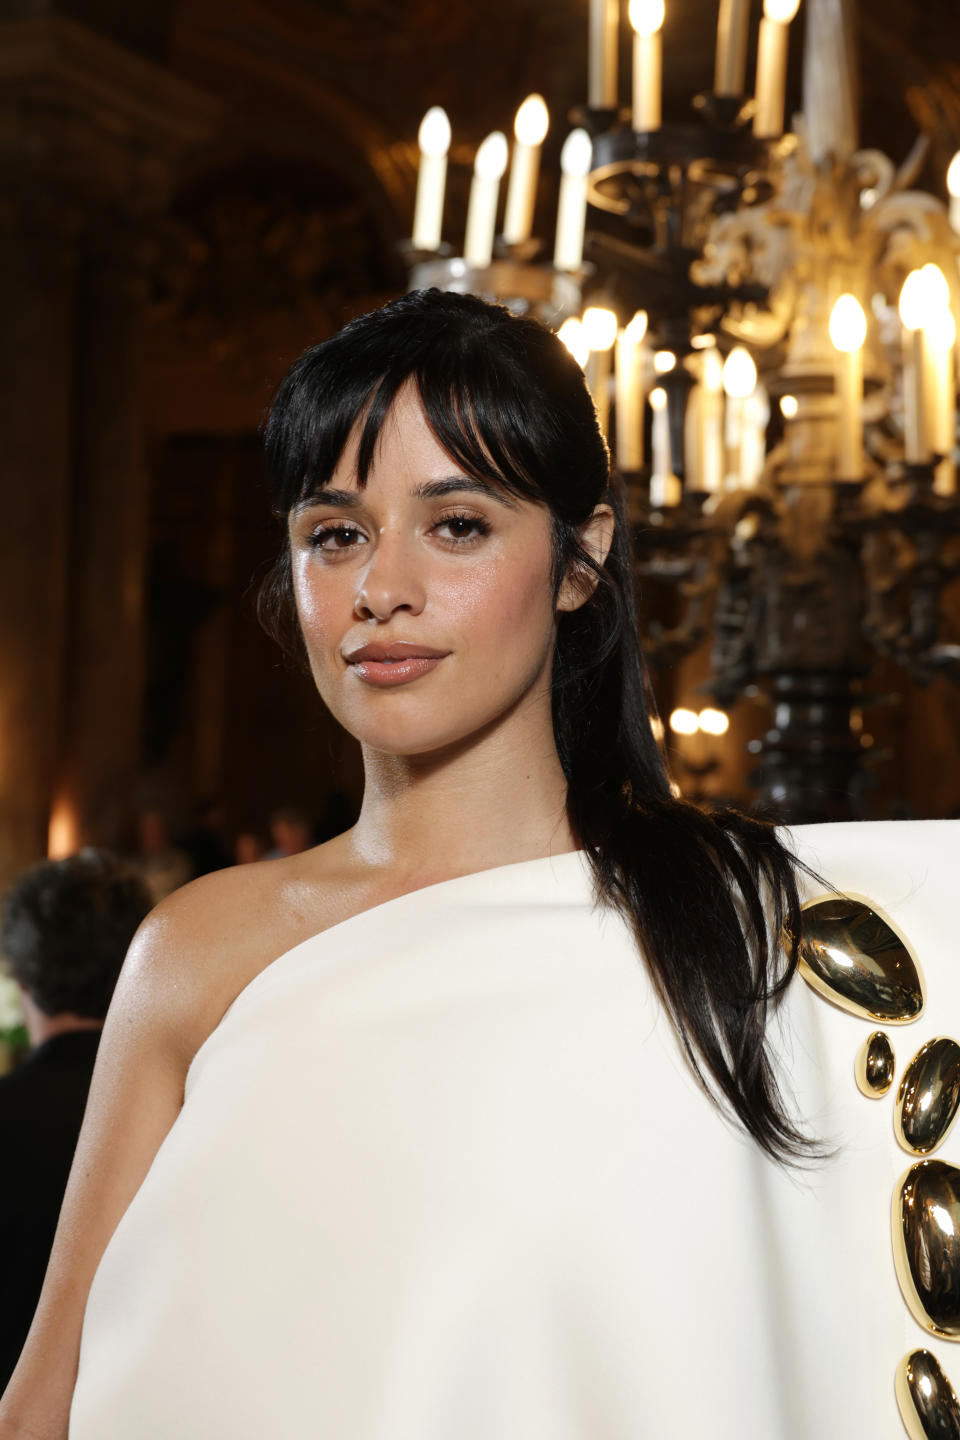 Camila Cabello photographed at the Stéphane Rolland Haute Couture fall-winter 2023-2024 fashion show on July 04, 2023 in Paris, France. Hair done by hairstylist Dimitris Giannetos.